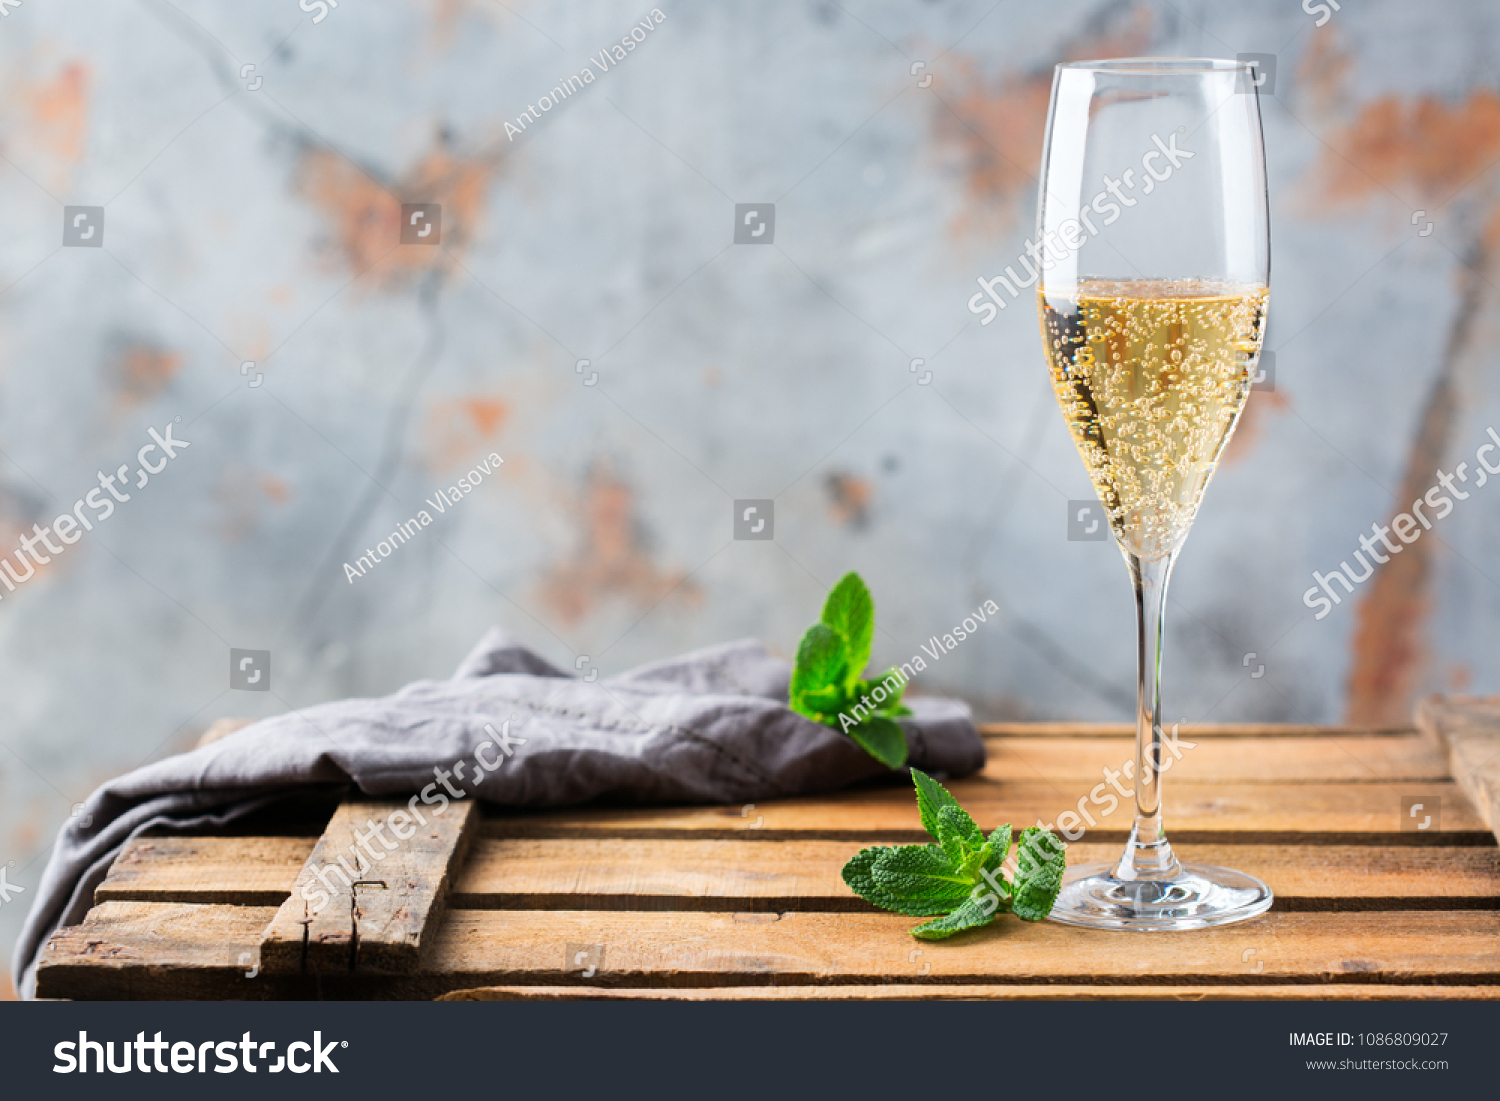 Food and drink, holidays party concept. Cold fresh alcohol beverage champagne sparkling white wine with bubbles in a flute glass on a wooden table. Copy space background #1086809027